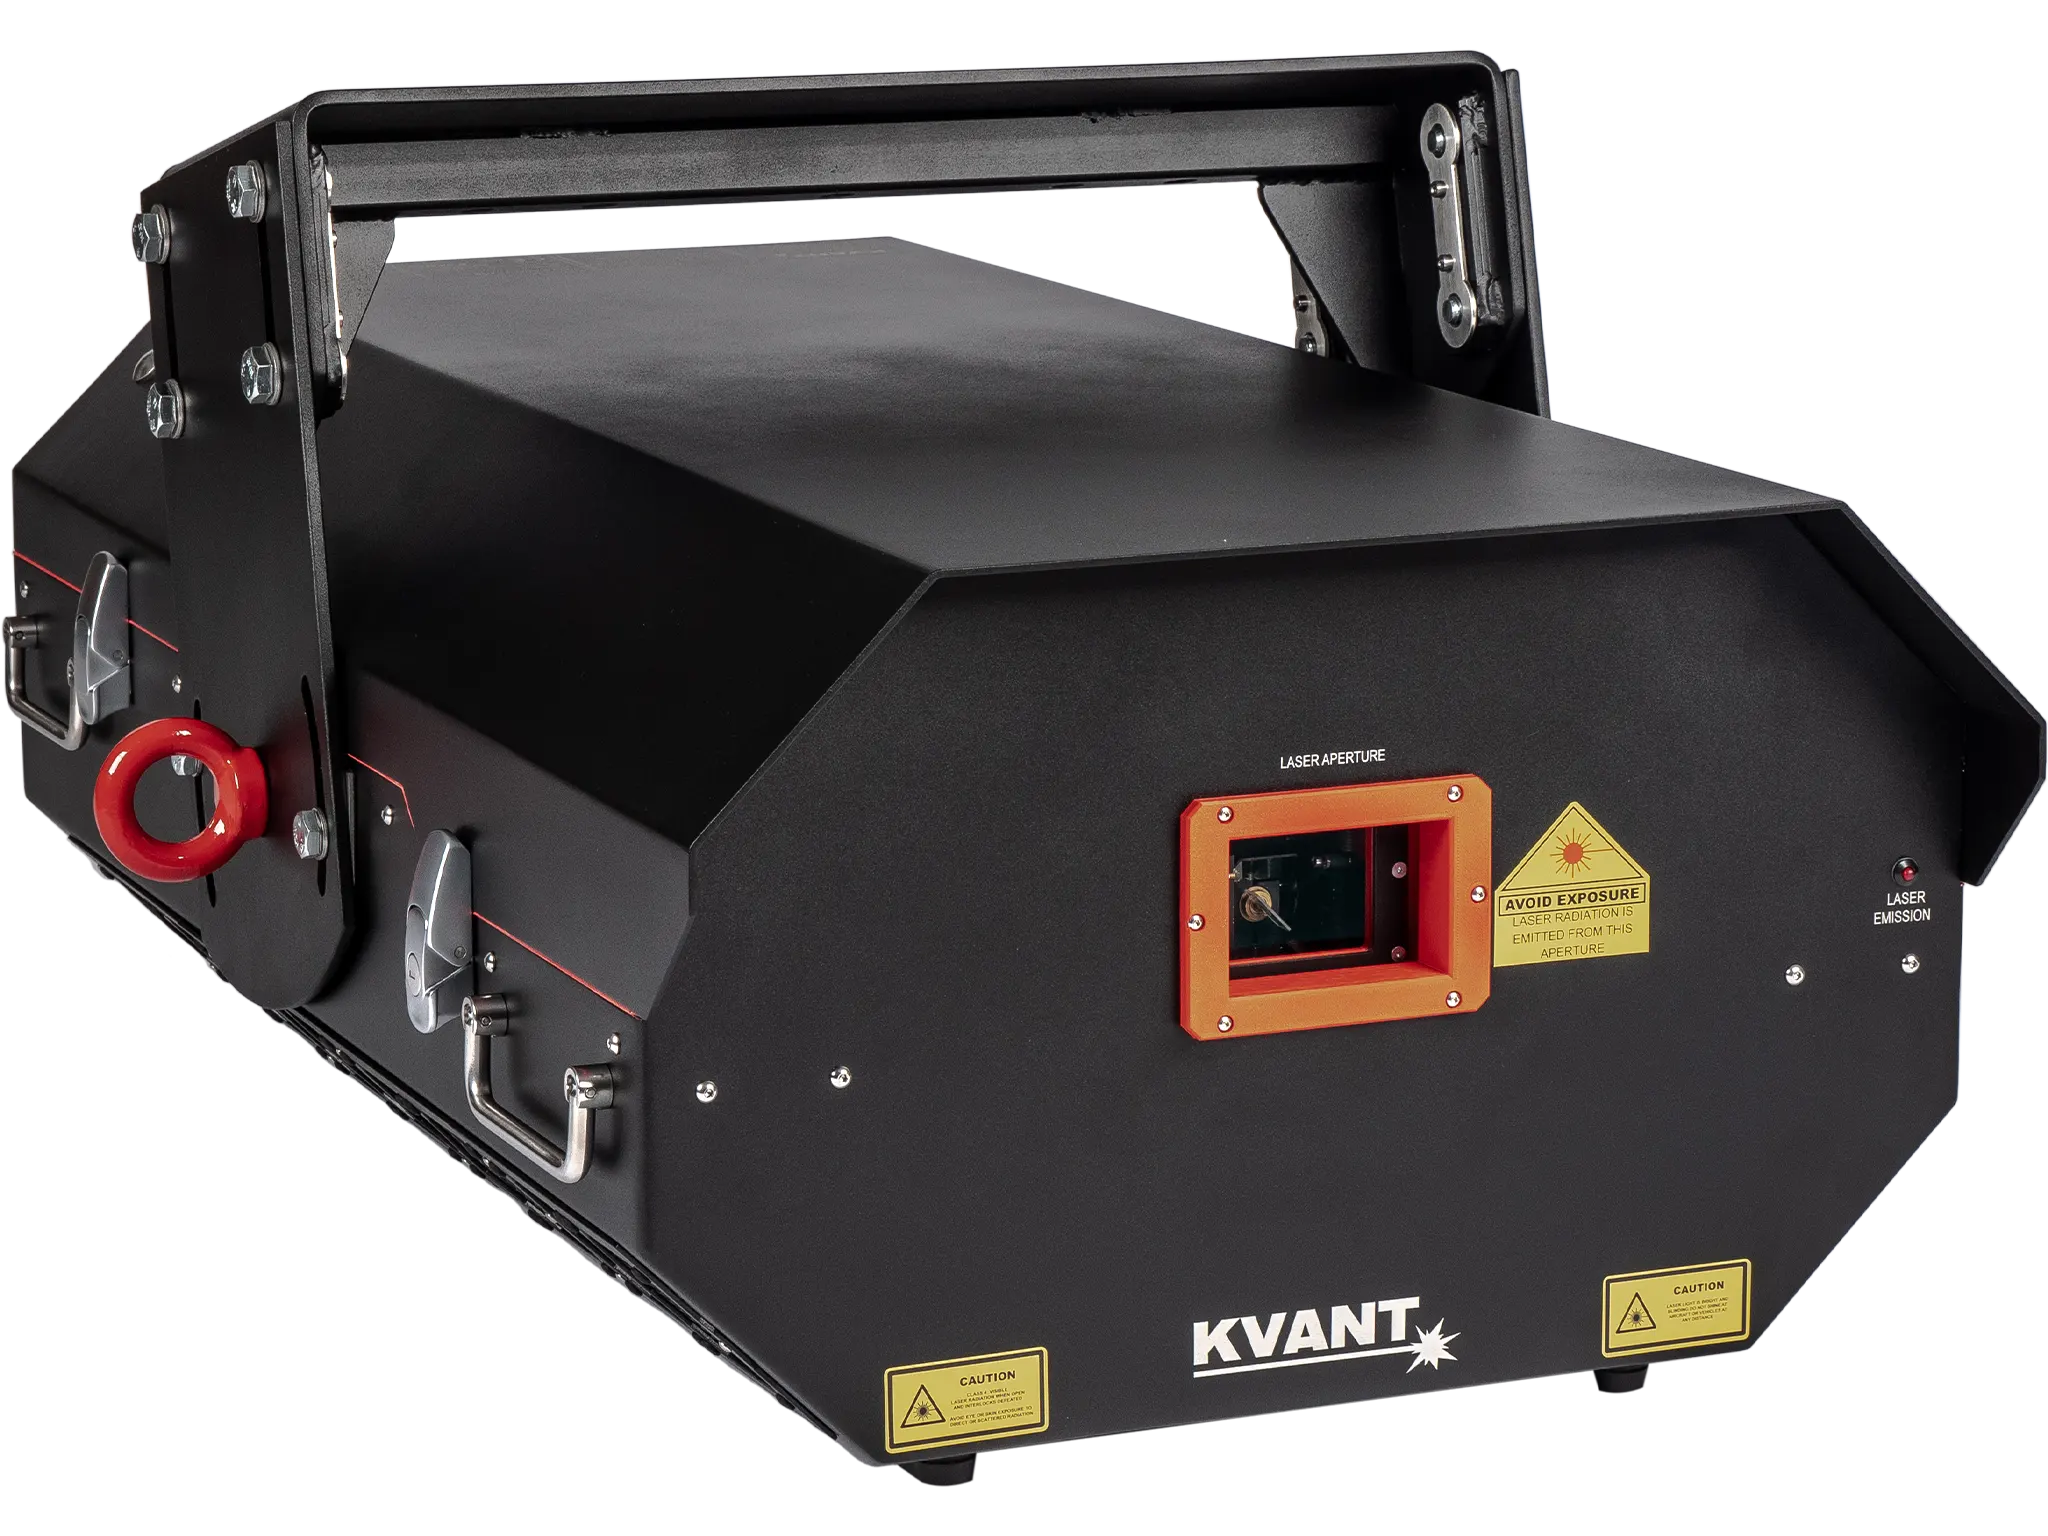 Kvant EPIC powerful outdoor laser system